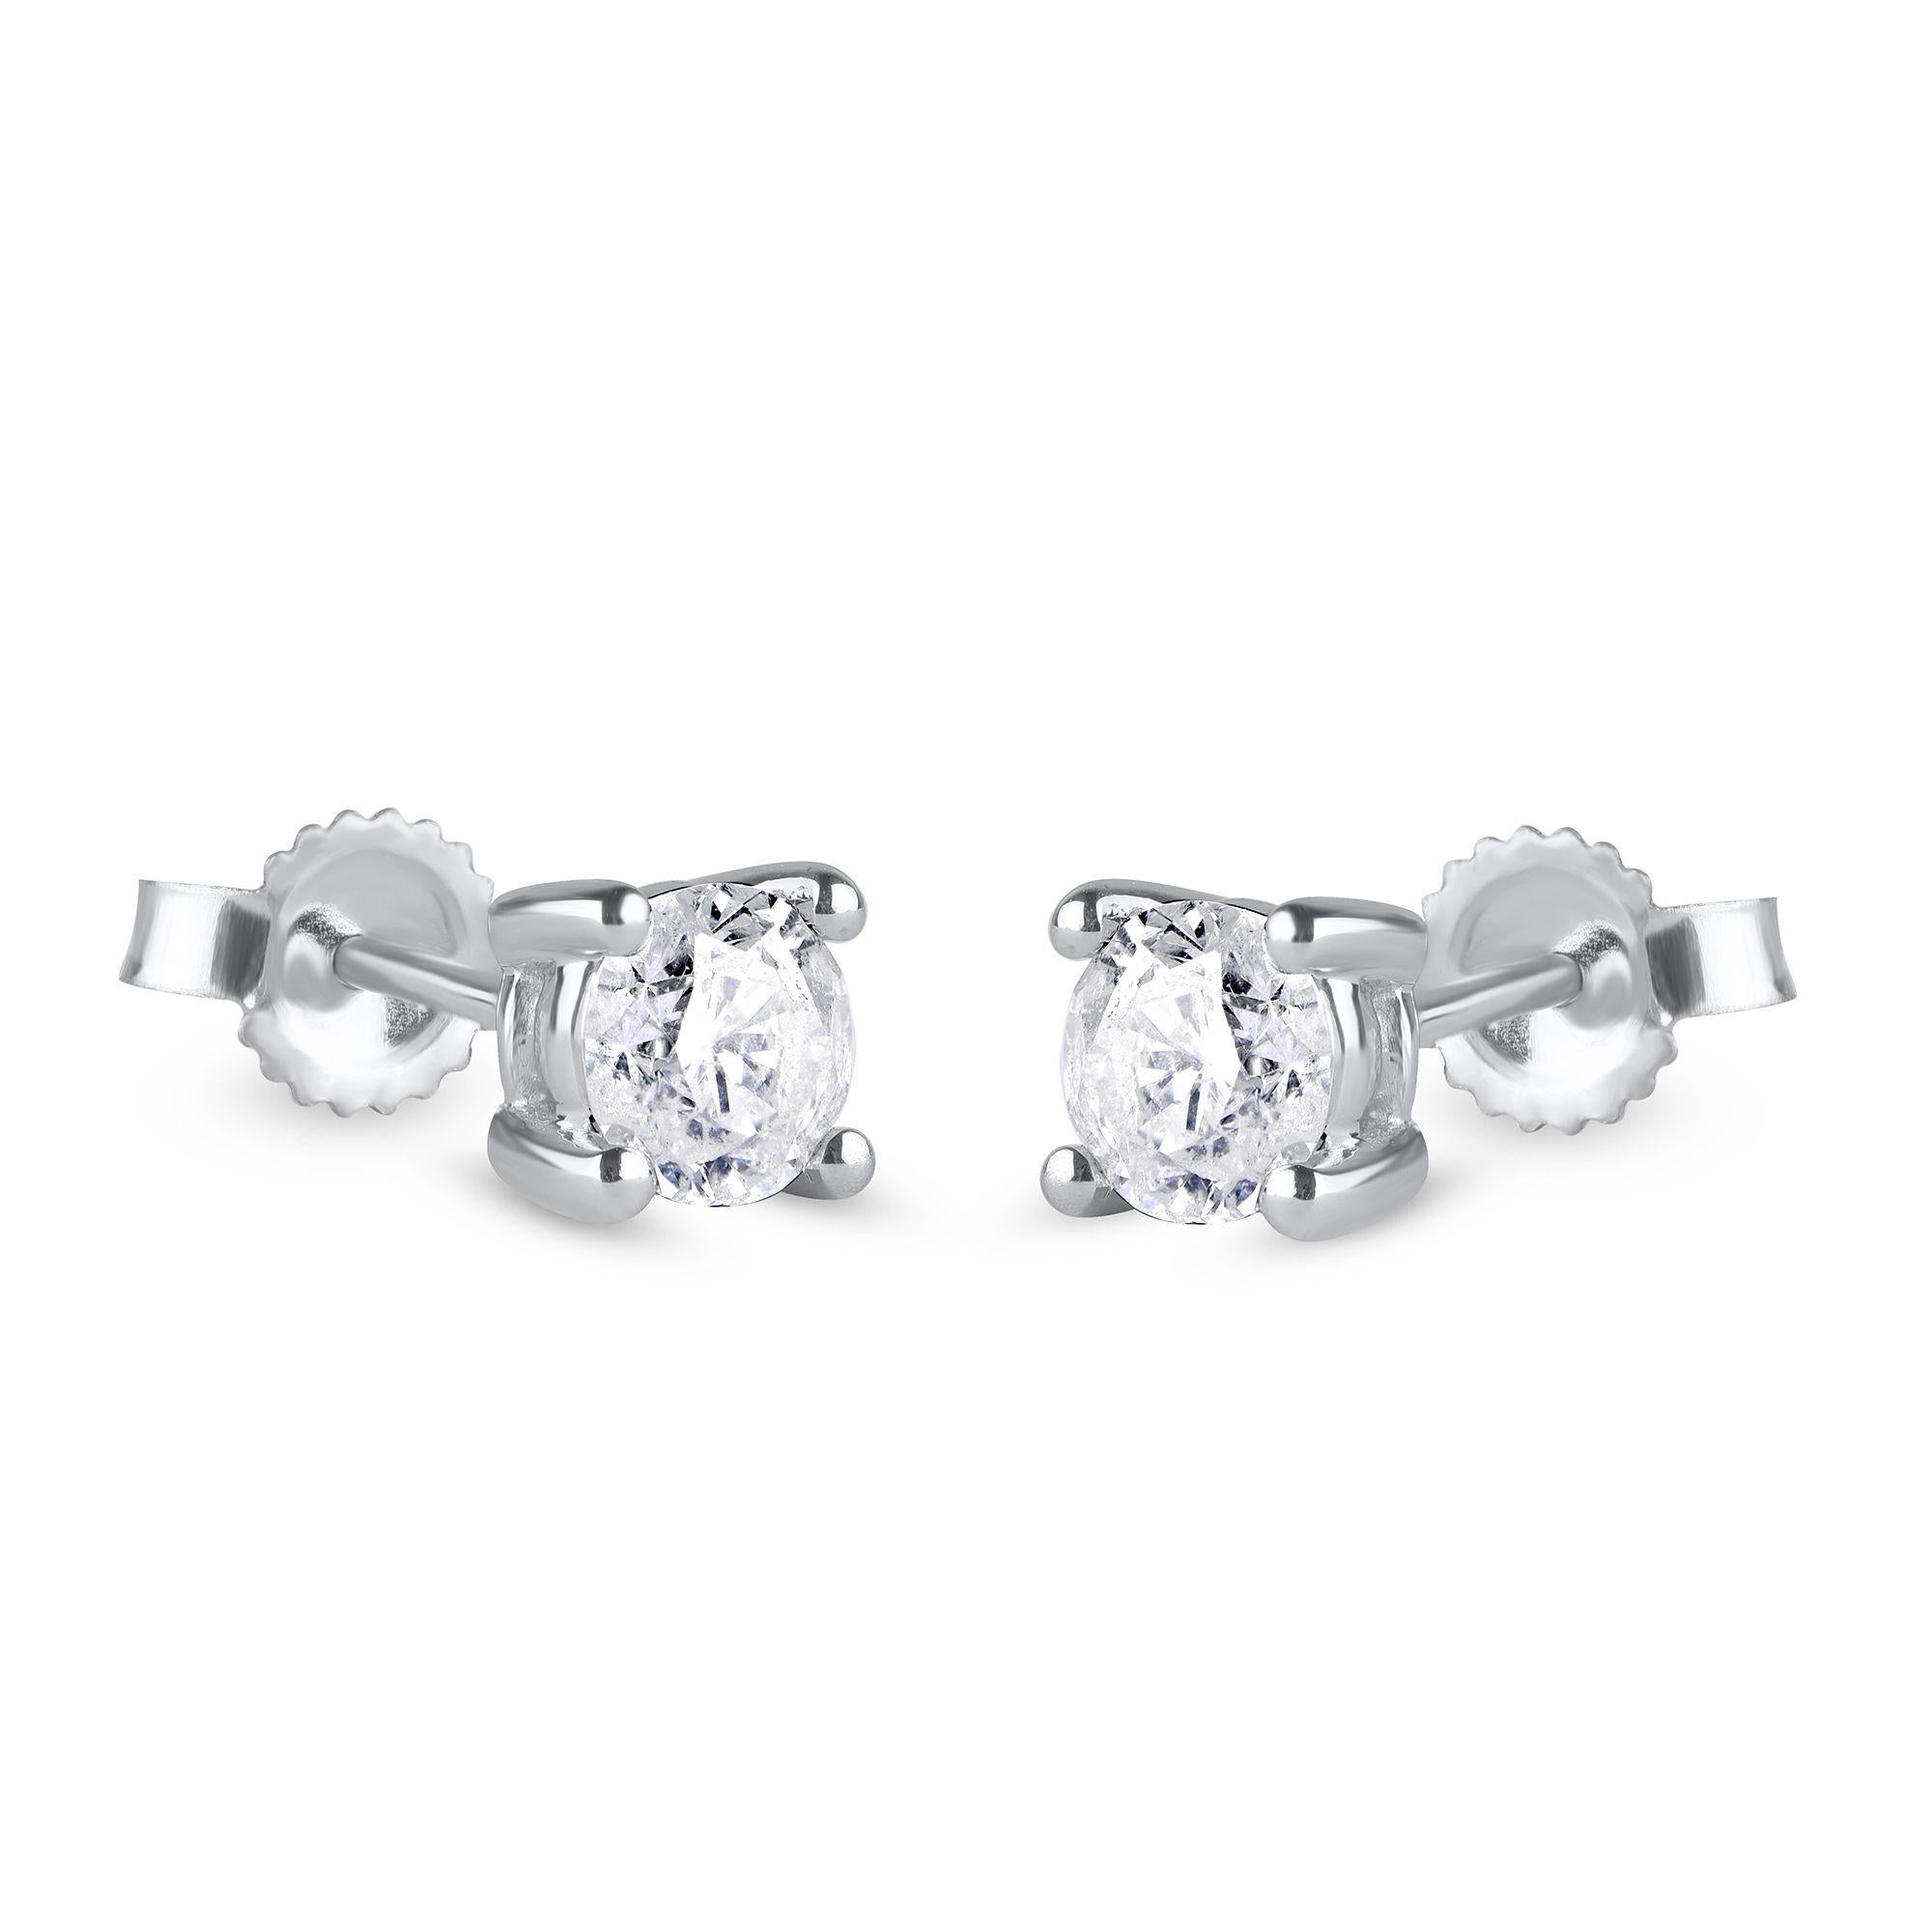 These diamond stud earrings are the perfect accessory. Made by our artisans in 10 karat white gold and each earring holds a single diamond in prong setting. The diamonds are graded G-H Color, I2-I3 Clarity. 
